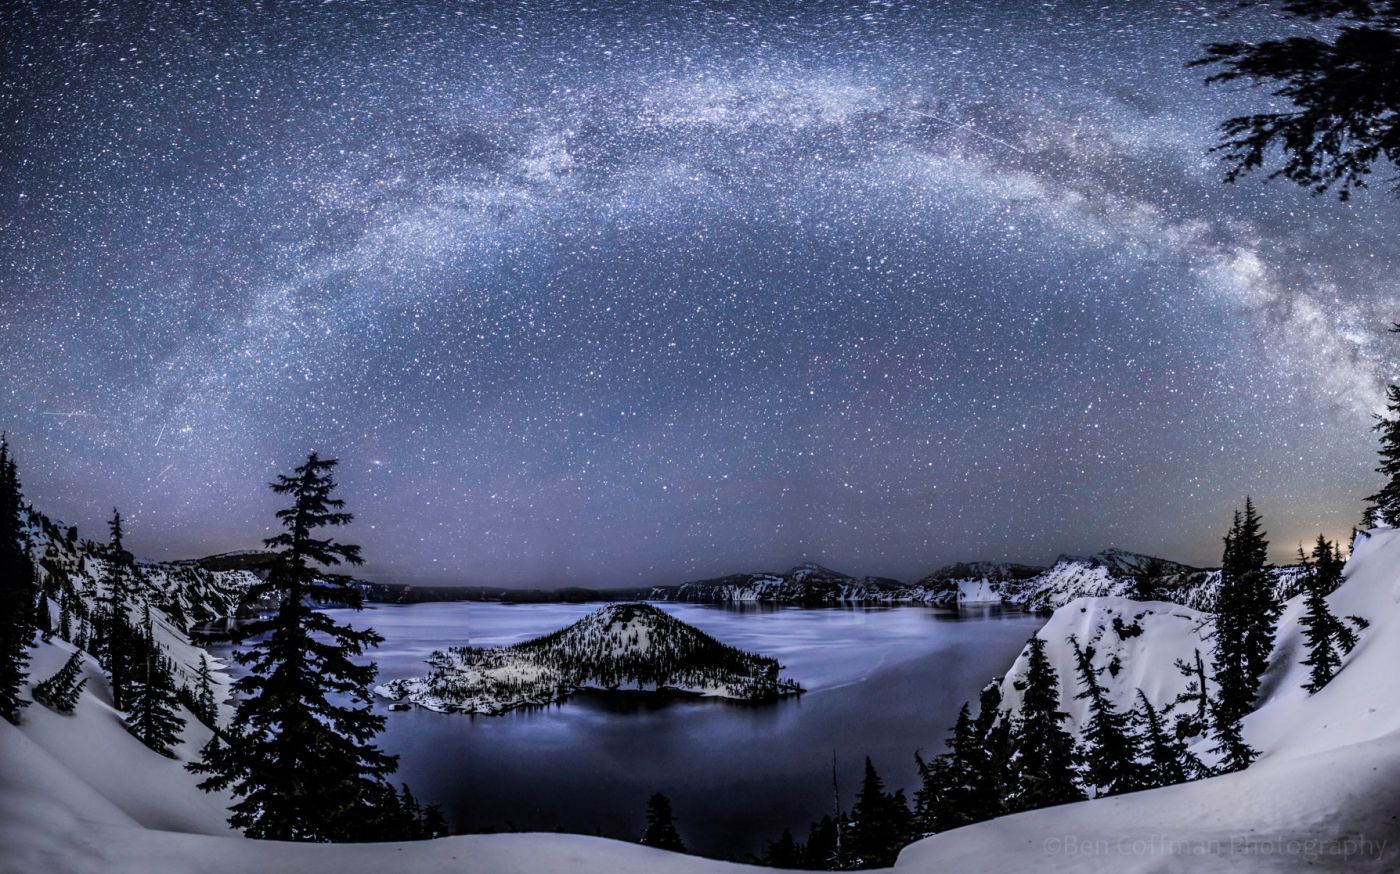 "The Crater Lake"